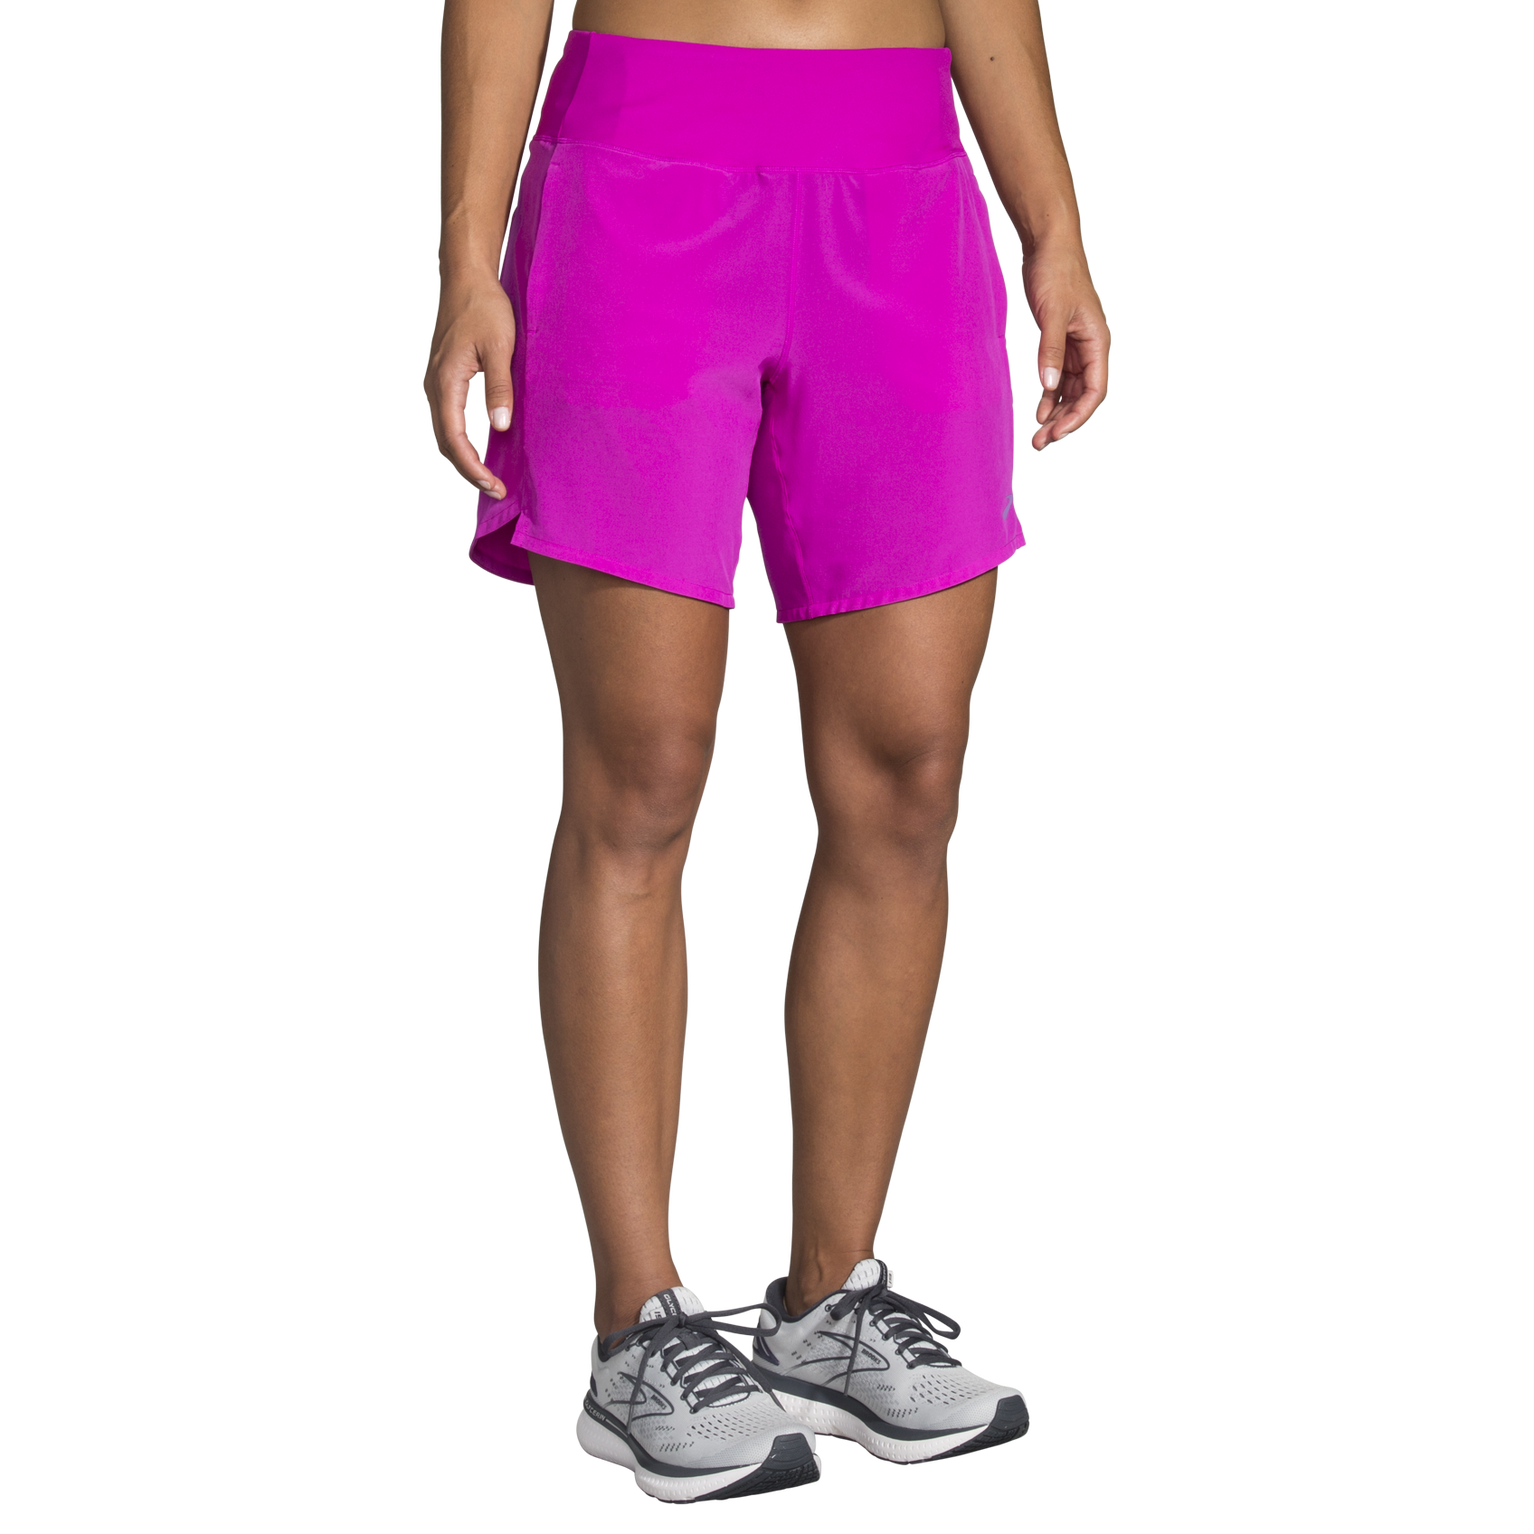 CRZ YOGA Women's Casual Sweat Shorts - 3.5'' Athletic Summer Comfy